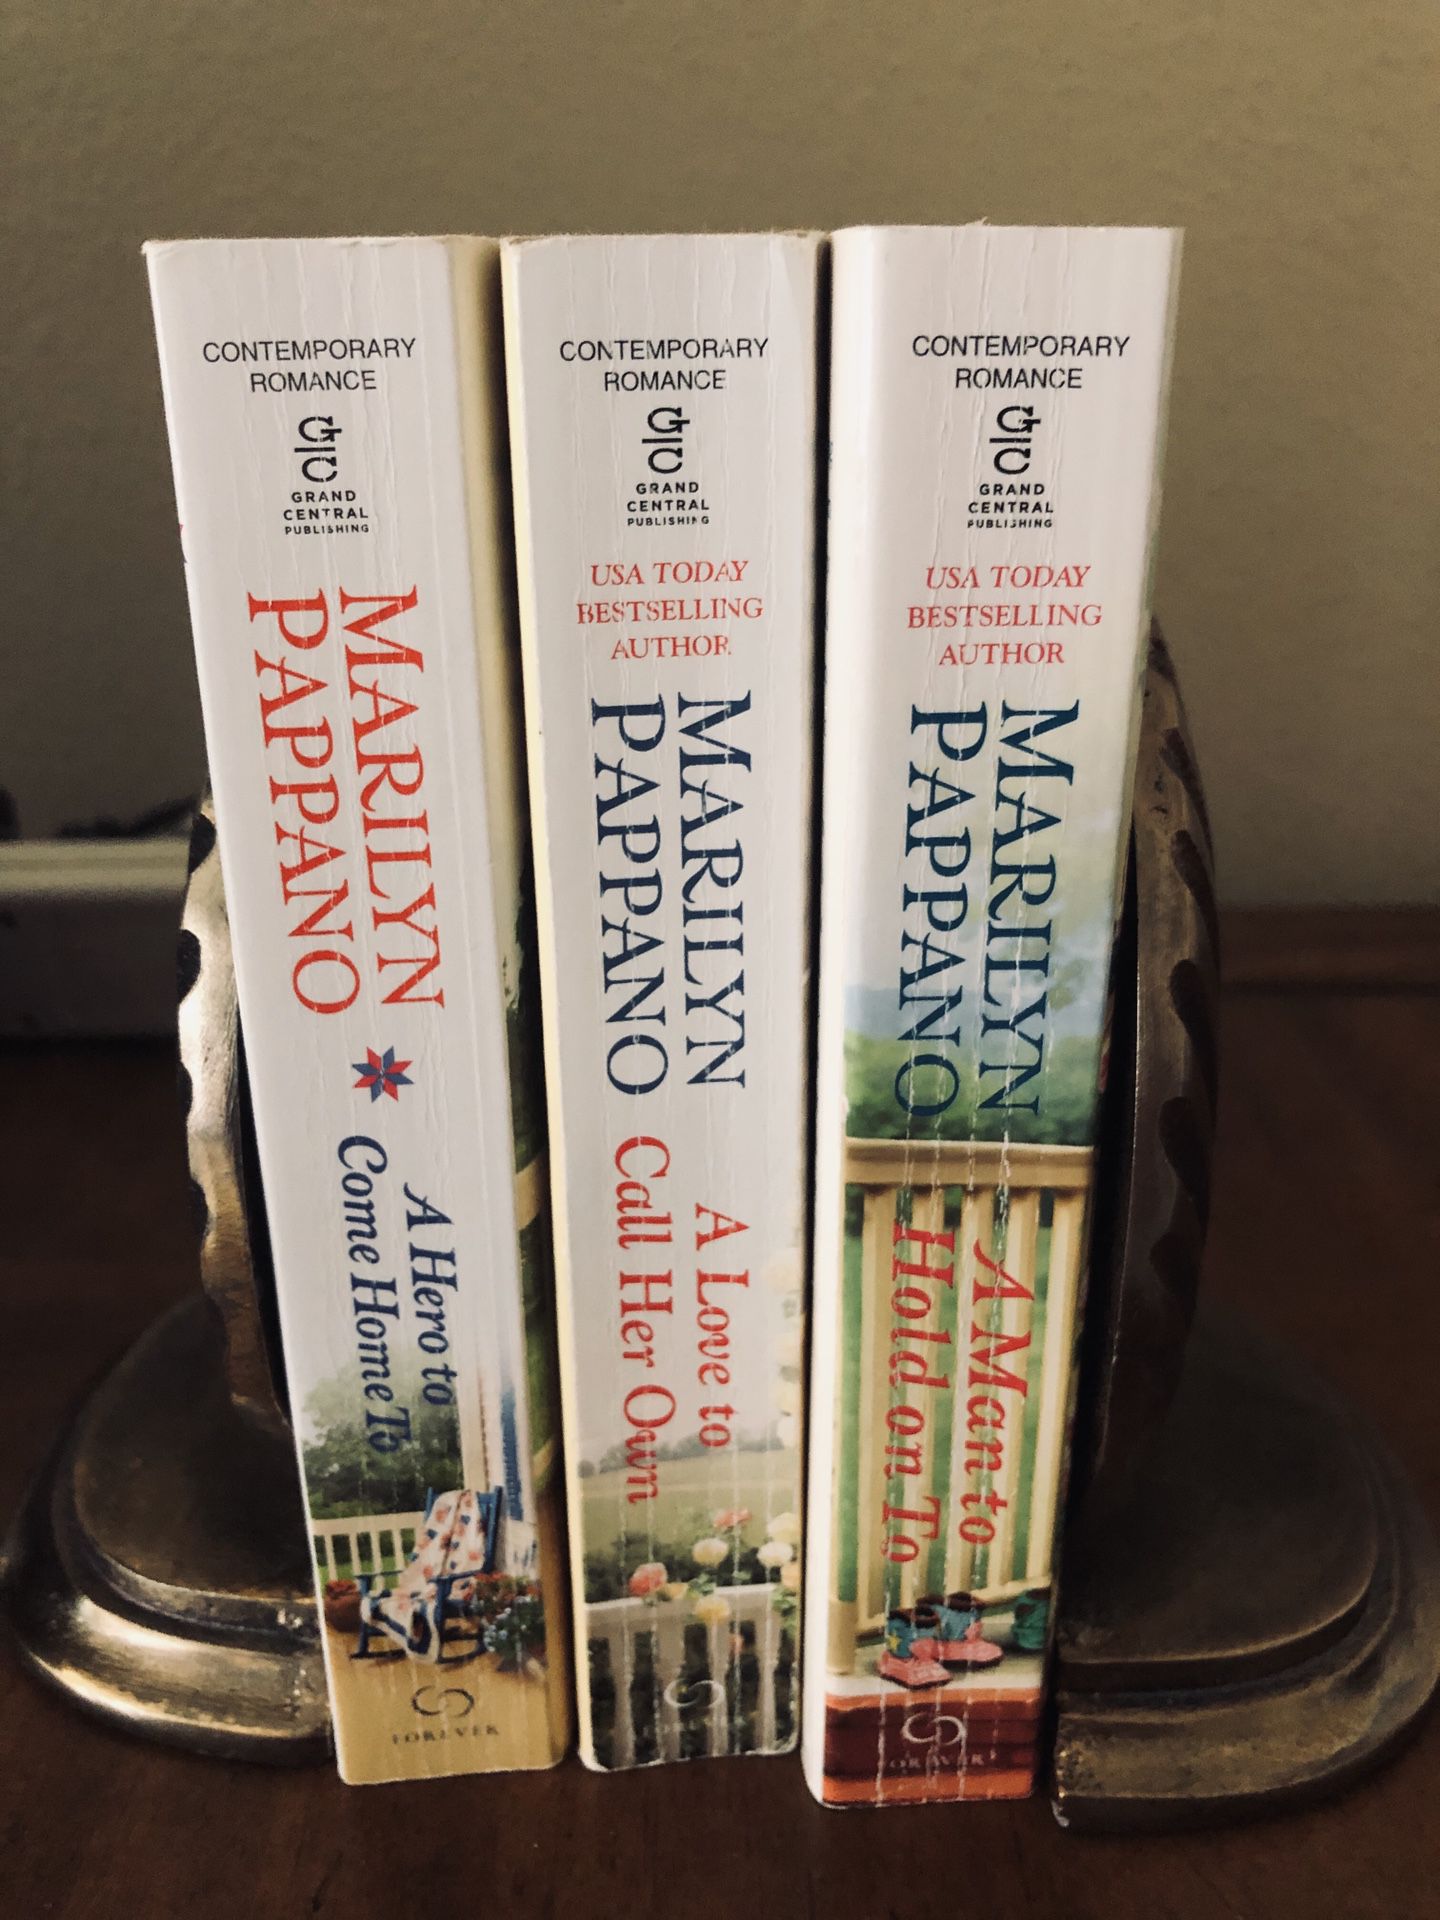 3 Marilyn Pappano books